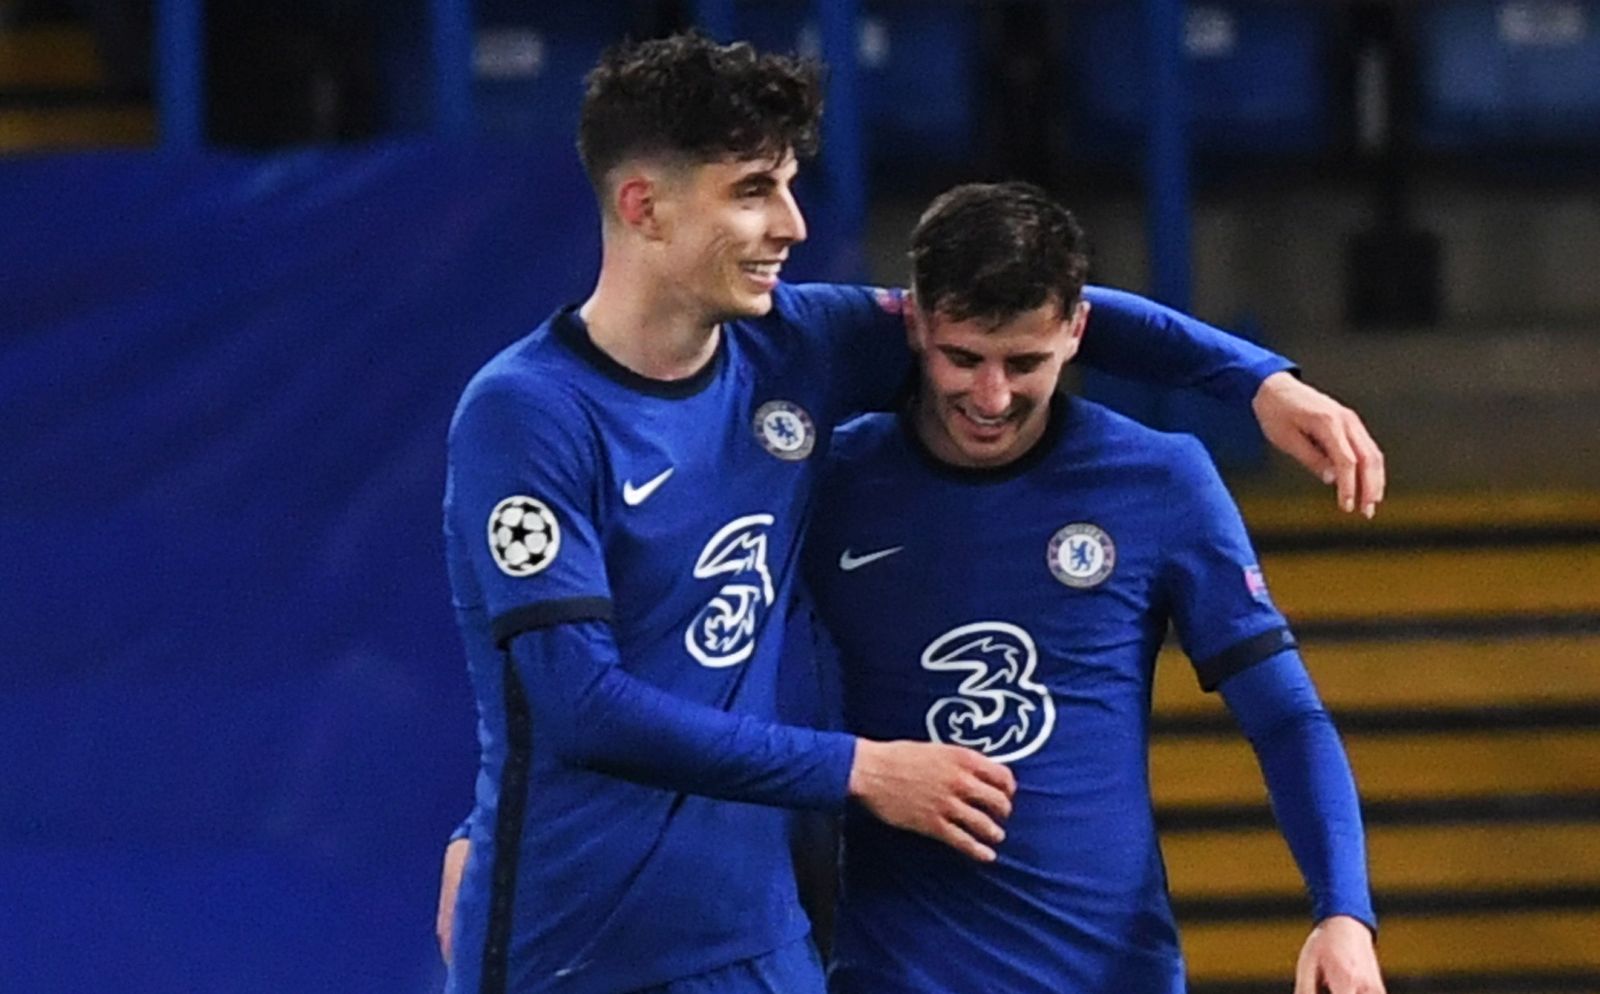 epa09179832 Mason Mount (R) of Chelsea celebrates with teammate Kai Havertz after scoring the 2-0  during the UEFA Champions League semi final, second leg soccer match between Chelsea FC and Real Madrid in London, Britain, 05 May 2021.  EPA/Neil Hall